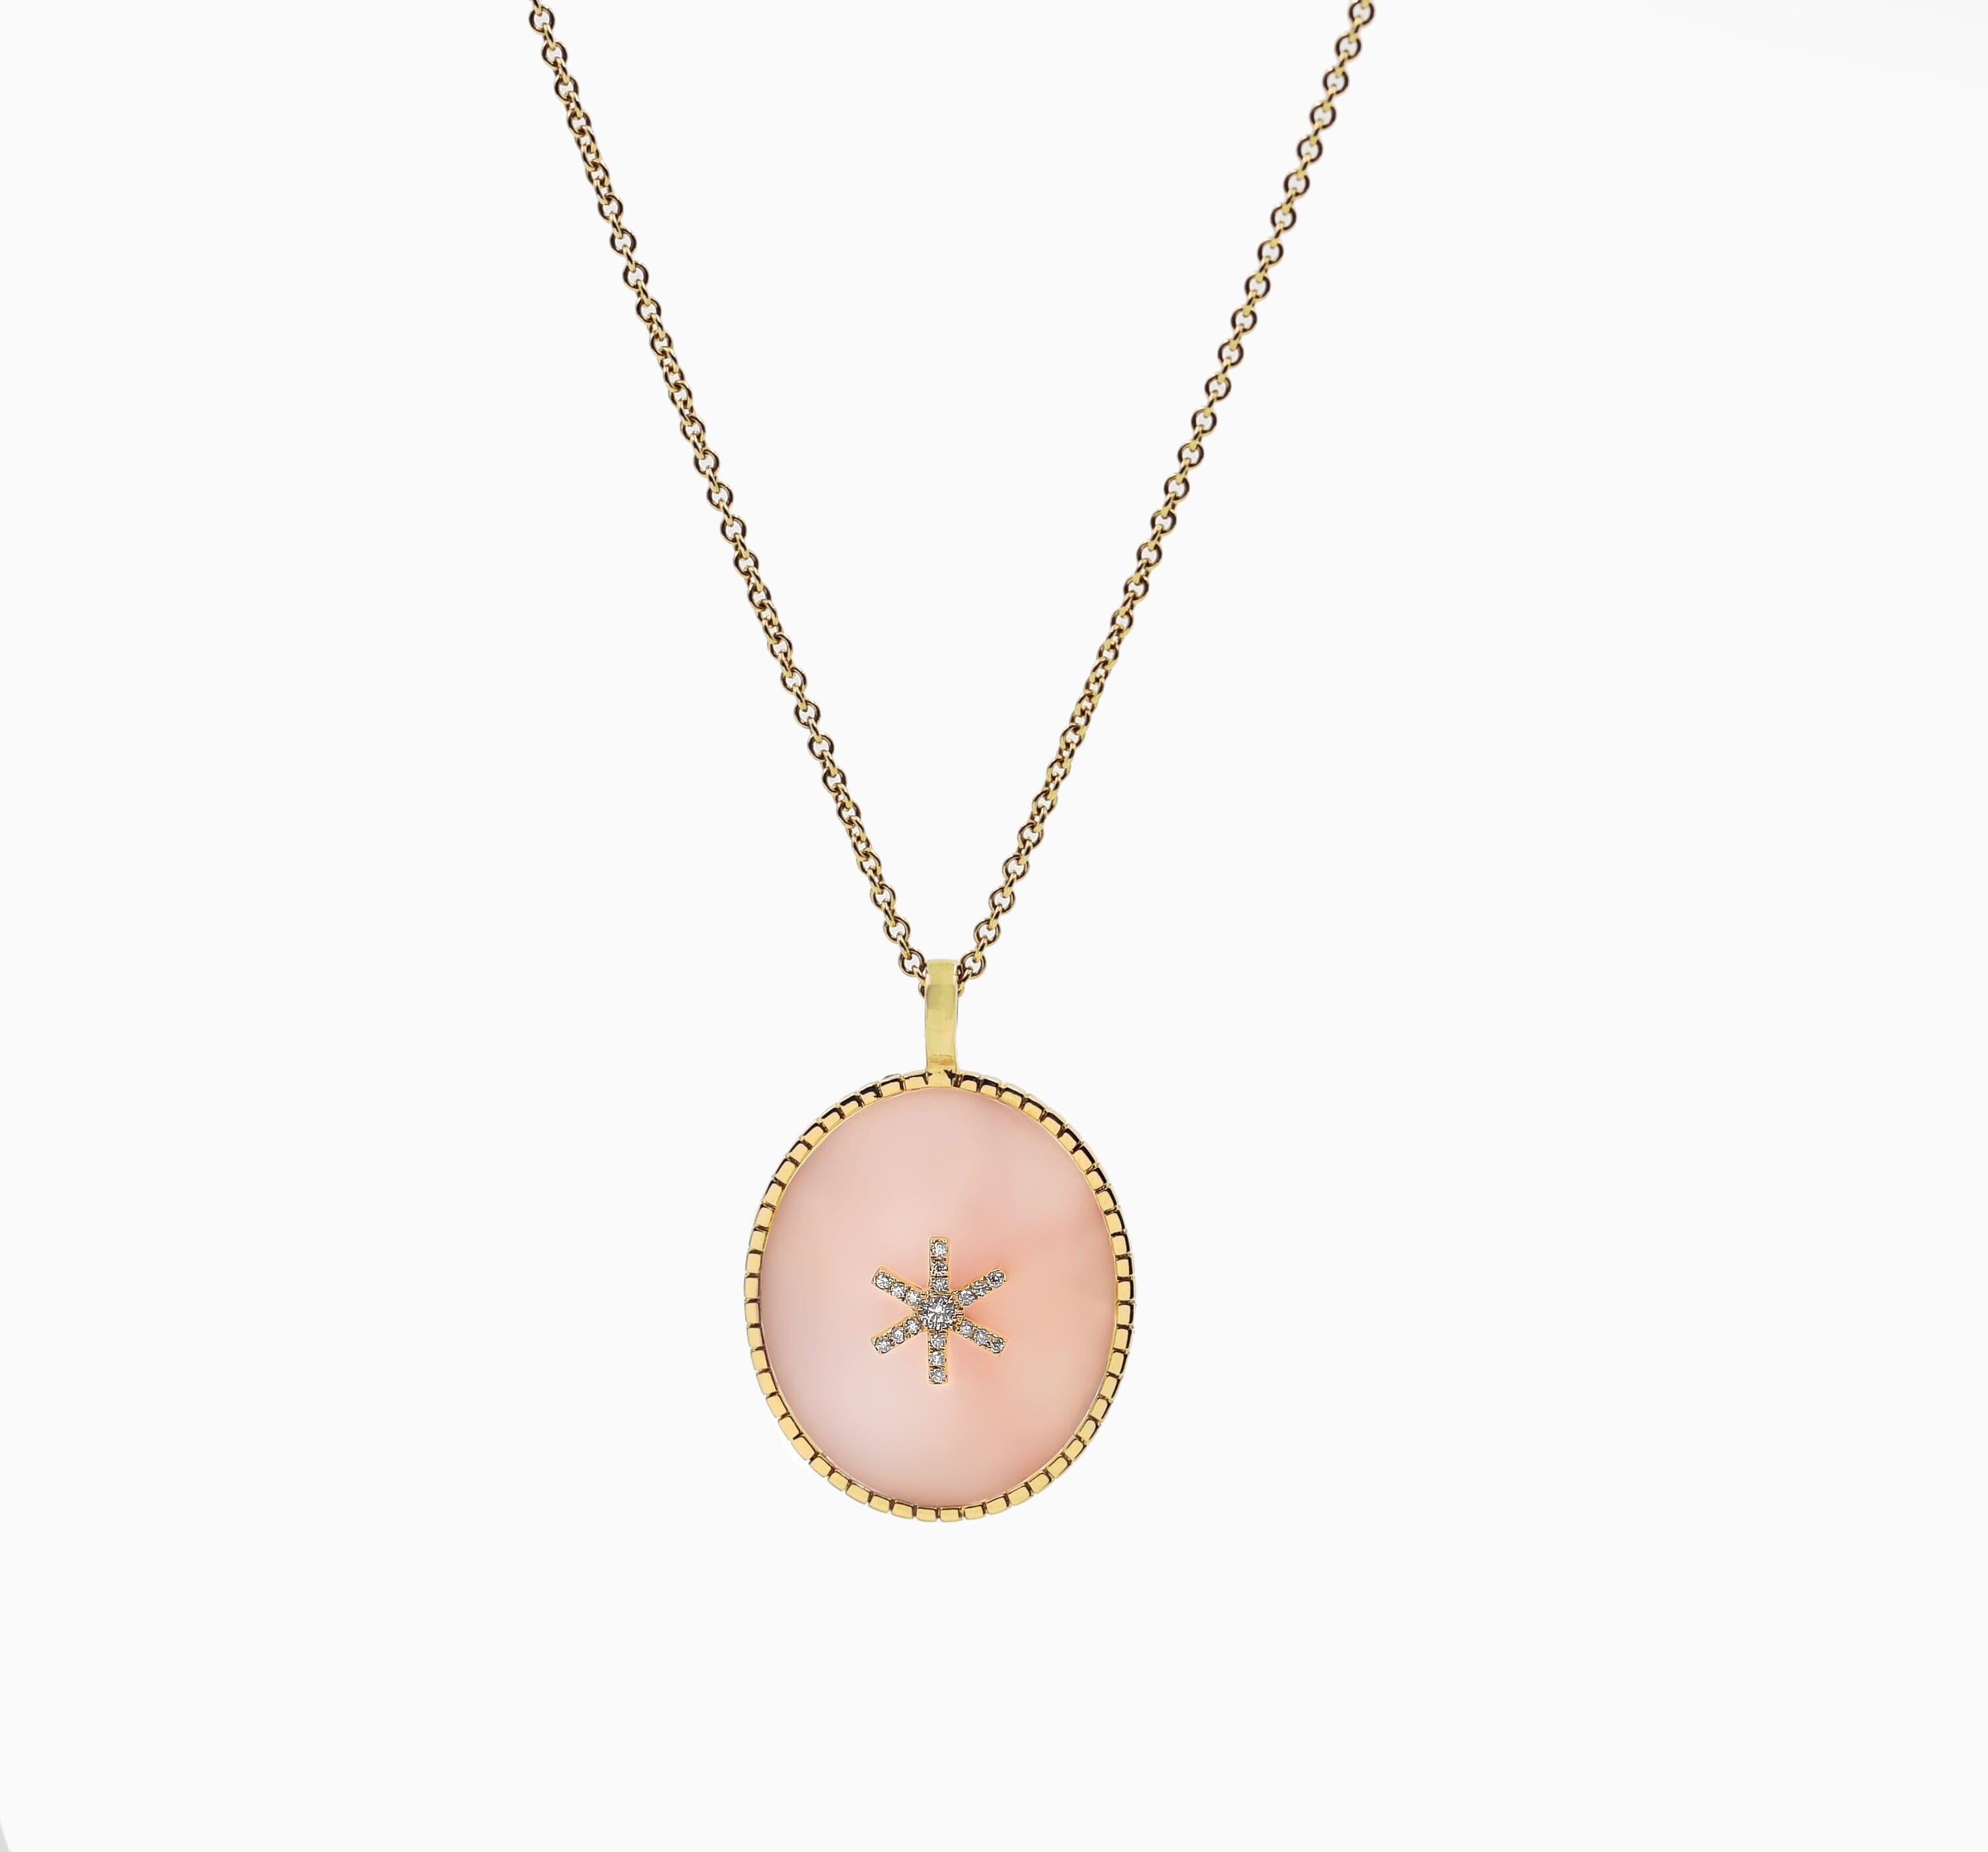 Michelle Pink Opal Necklace Necklaces - BONDEYE JEWELRY ®